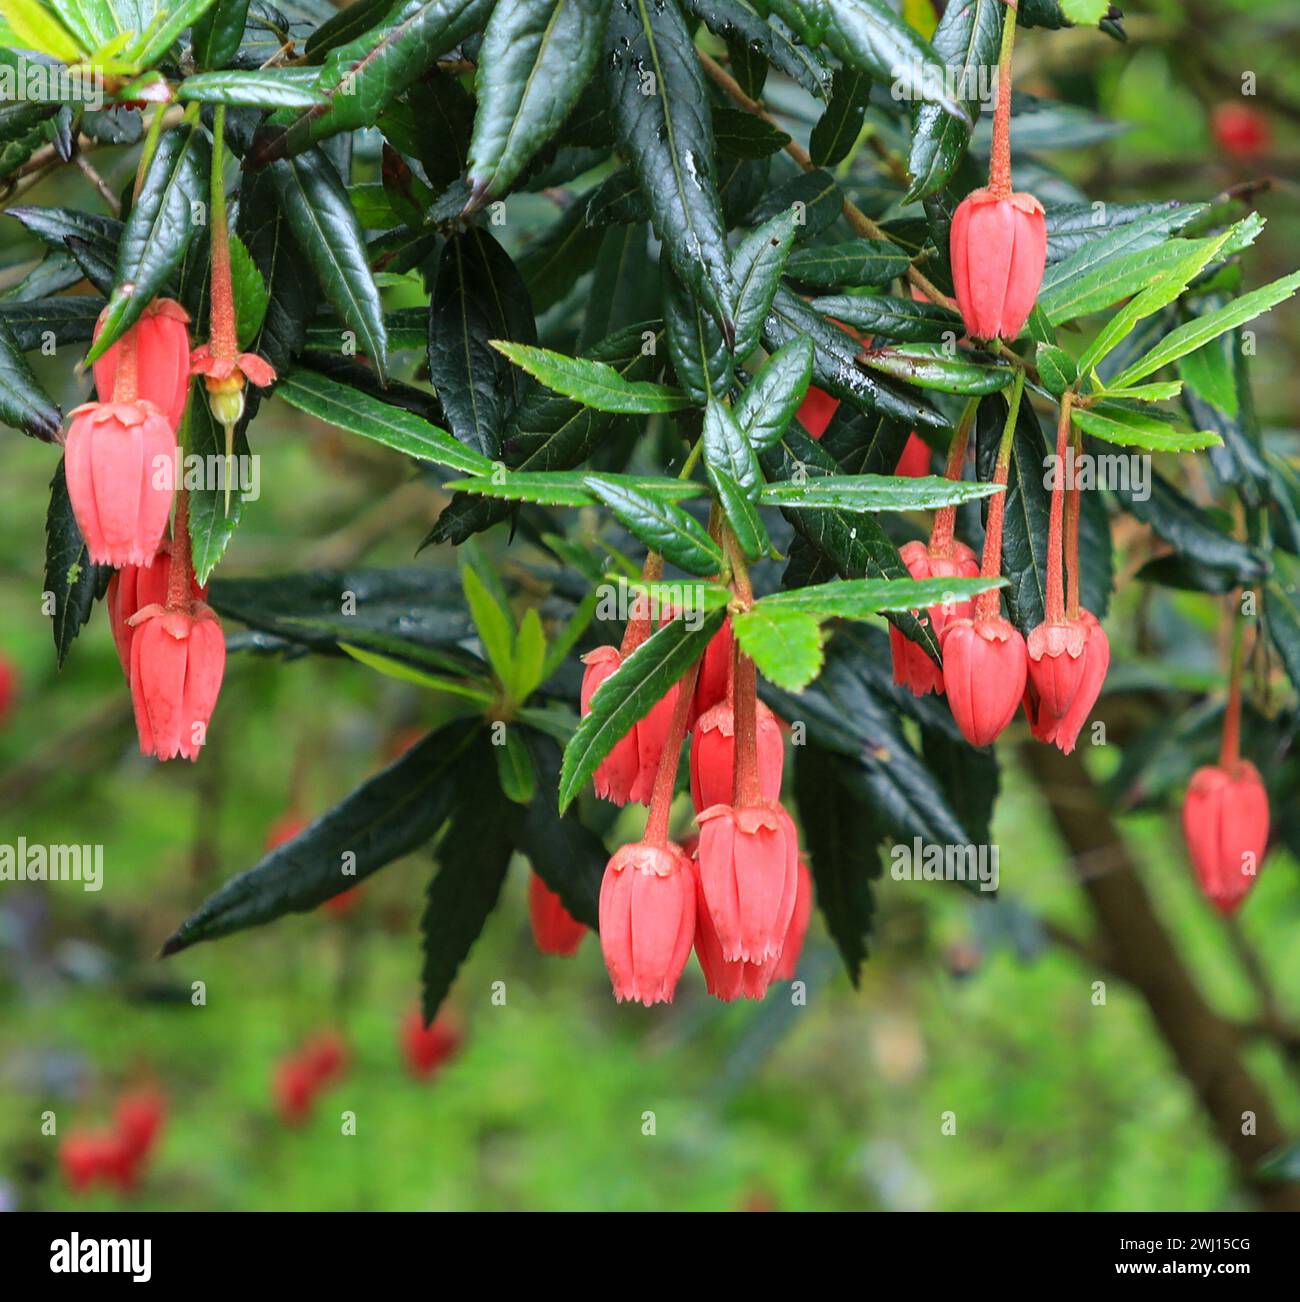 The bright red bell like flowers of Chilean lantern tree (Crinodendron hookerianum) or (tricuspidaria lanceolata), Cornwall, England, UK Stock Photo